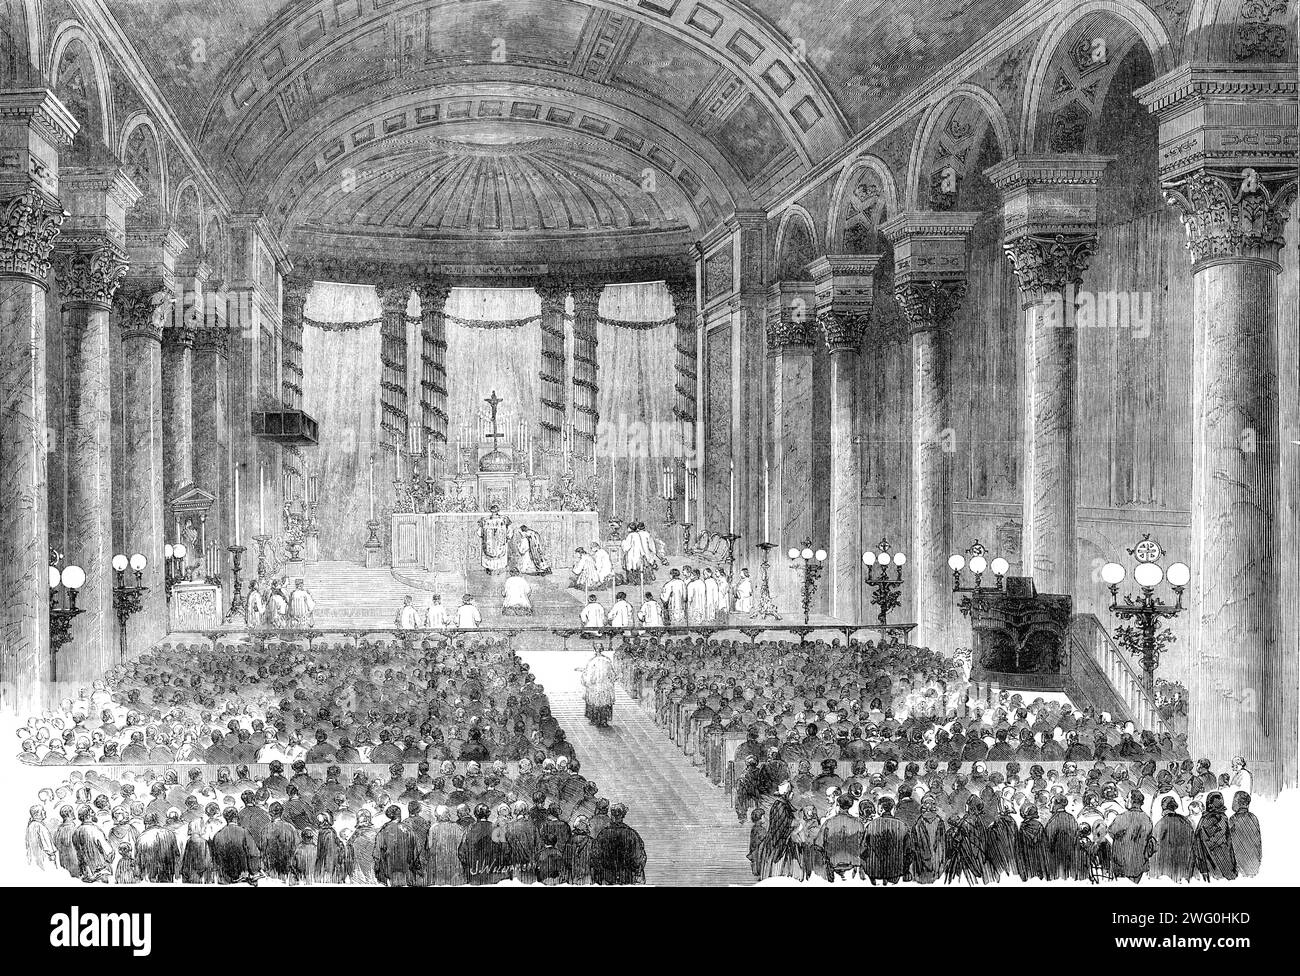 Midnight Mass at St. Mary's, Moorfields, on Christmas Eve, 1862. 'Our Illustration represents one of the most imposing ceremonies of the Roman Catholic Church, as celebrated in an edifice which stands next to the Cathedral of St. George amongst the places of worship of that persuasion in London. St. Mary's, Moorfields, which is situated at the corner of East-street, Finsbury-circus, was opened in 1820...The interior is handsome - indeed, it may be called superb. The semicircular altar-wall, behind a screen of marble columns, has a large painting of the Crucifixion, by Aglio, an Italian artist, Stock Photo